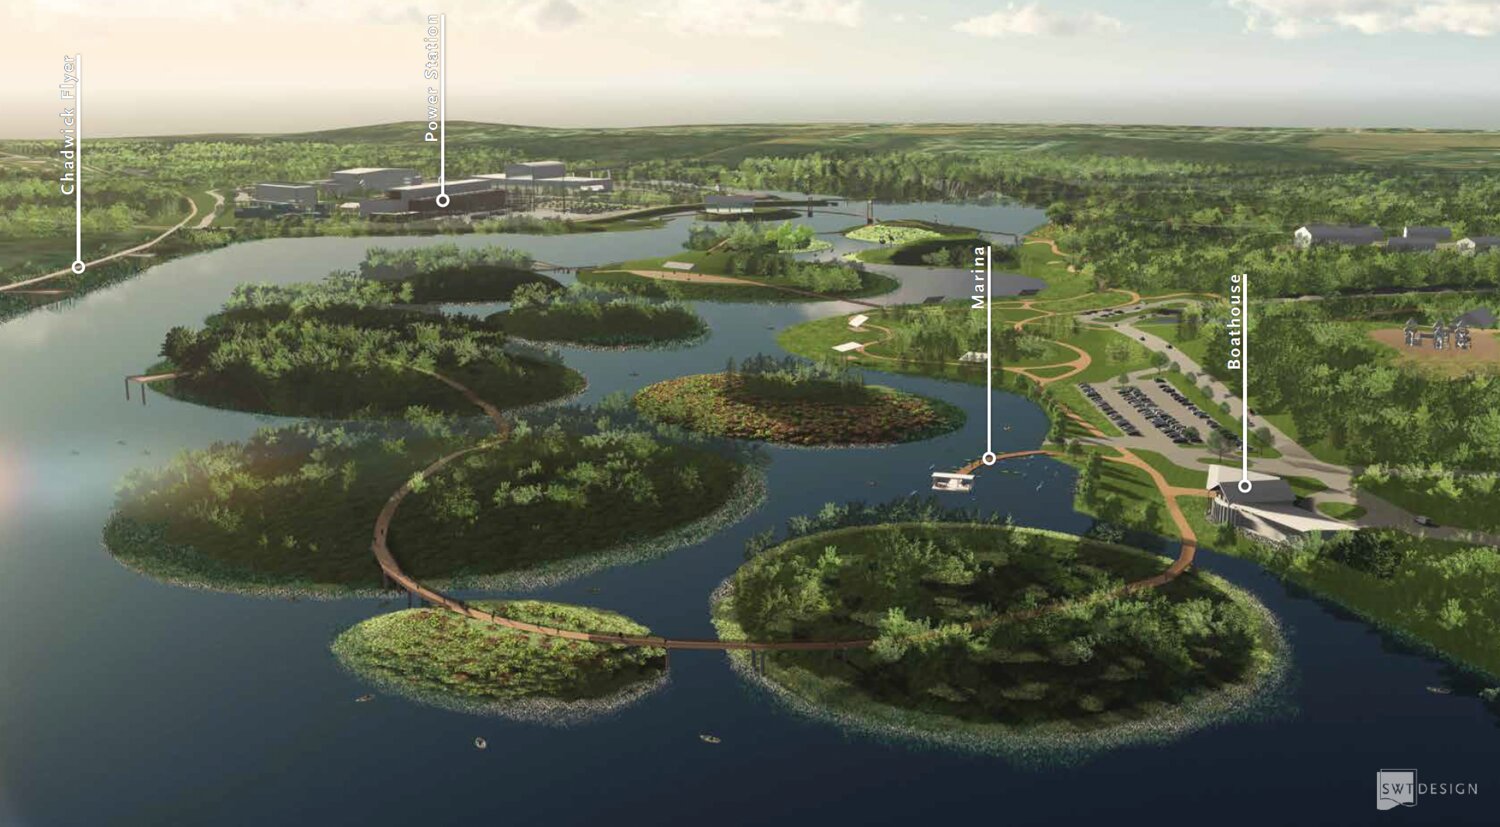 Structures called eco islands could be built by dredging parts of Lake Springfield, and these could be connected by elevated, accessible walkways.